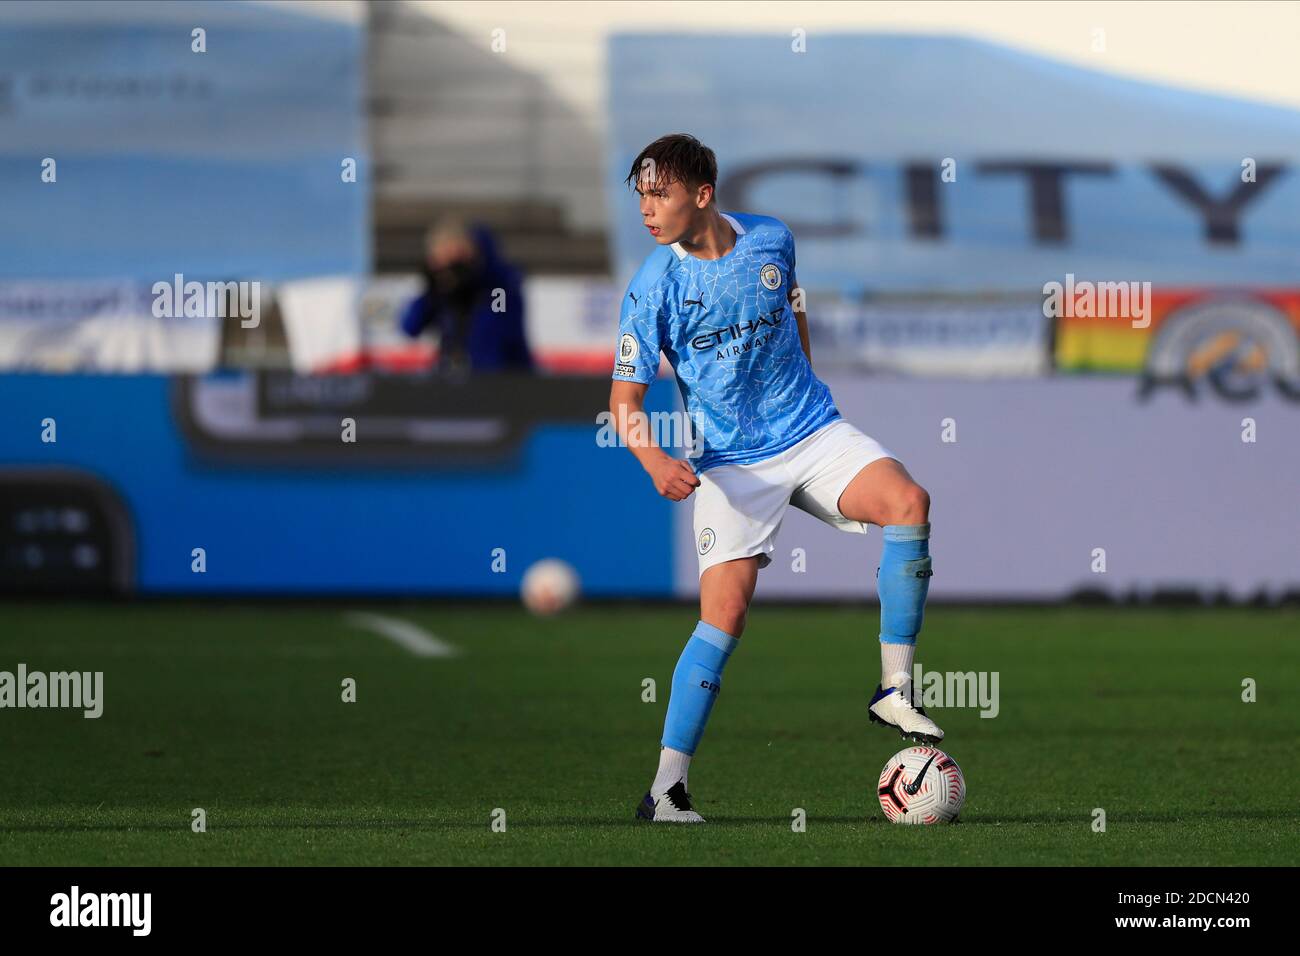 Manchester, UK. 22nd Nov, 2020. Callum Doyle #5 of Manchester City controls the ball Credit: News Images /Alamy Live News Stock Photo